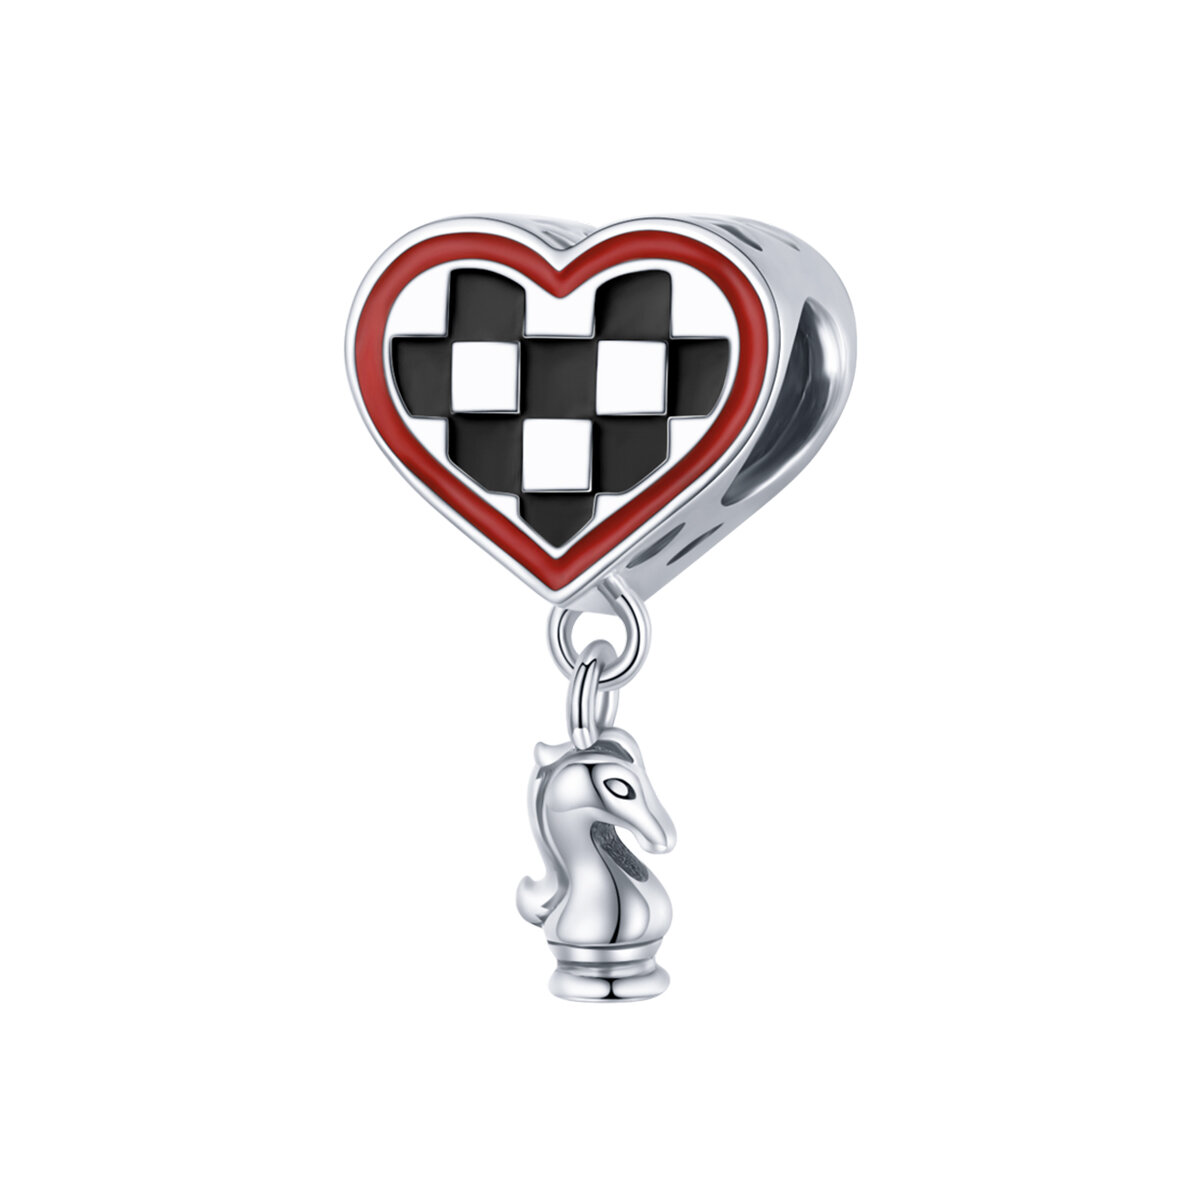 GemKing SCC1833 Heart-shaped chessboard S925 Sterling Silver Charm